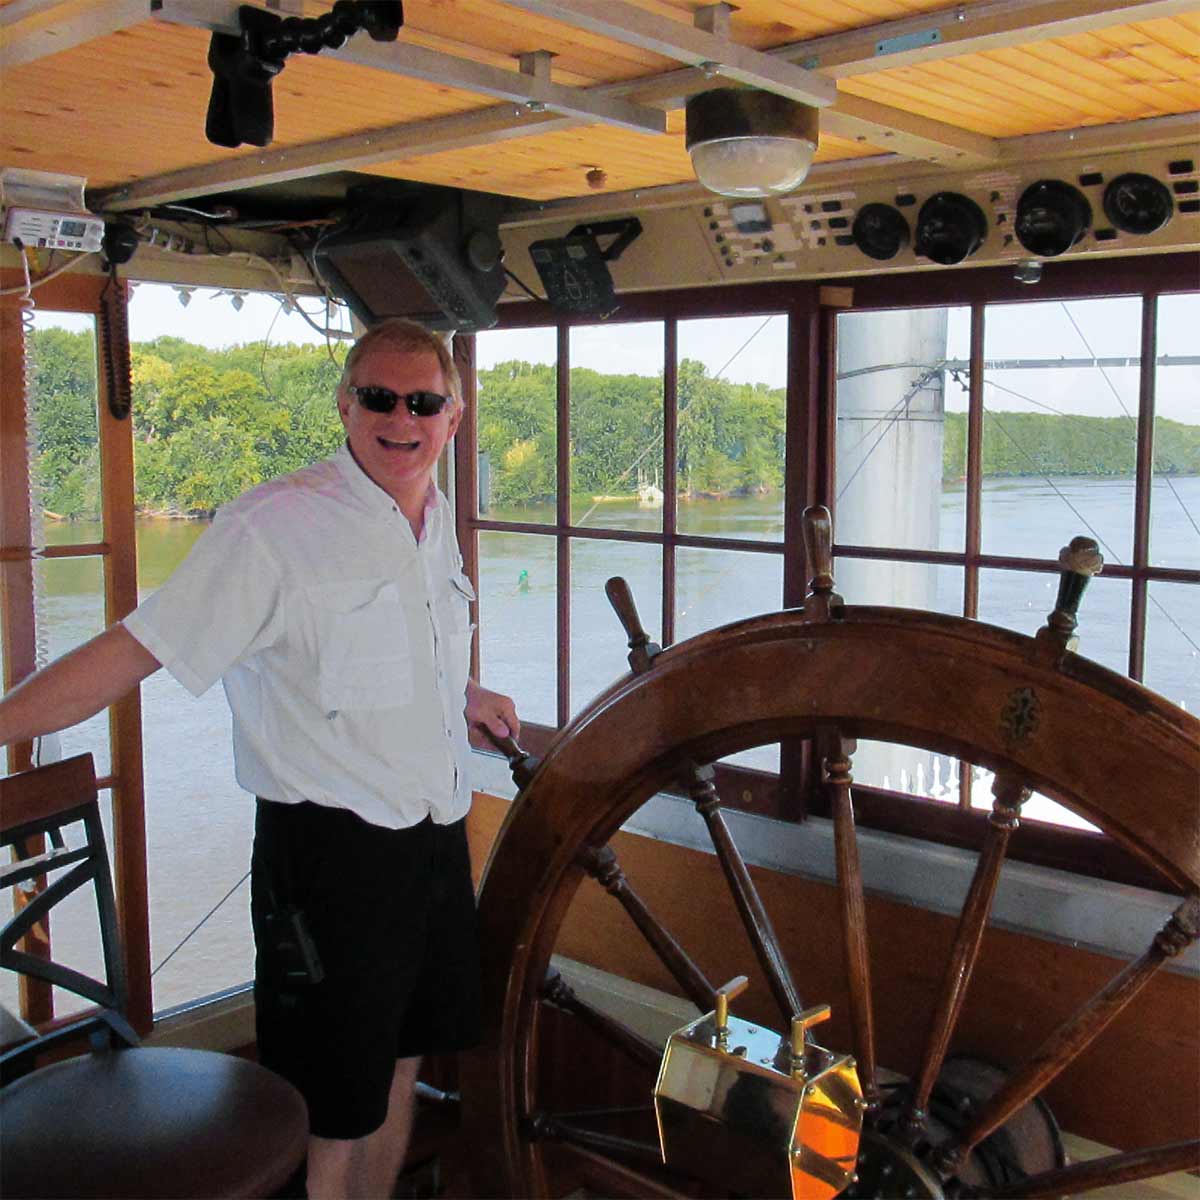 Captain Kevin at the steering wheel of the riverboat